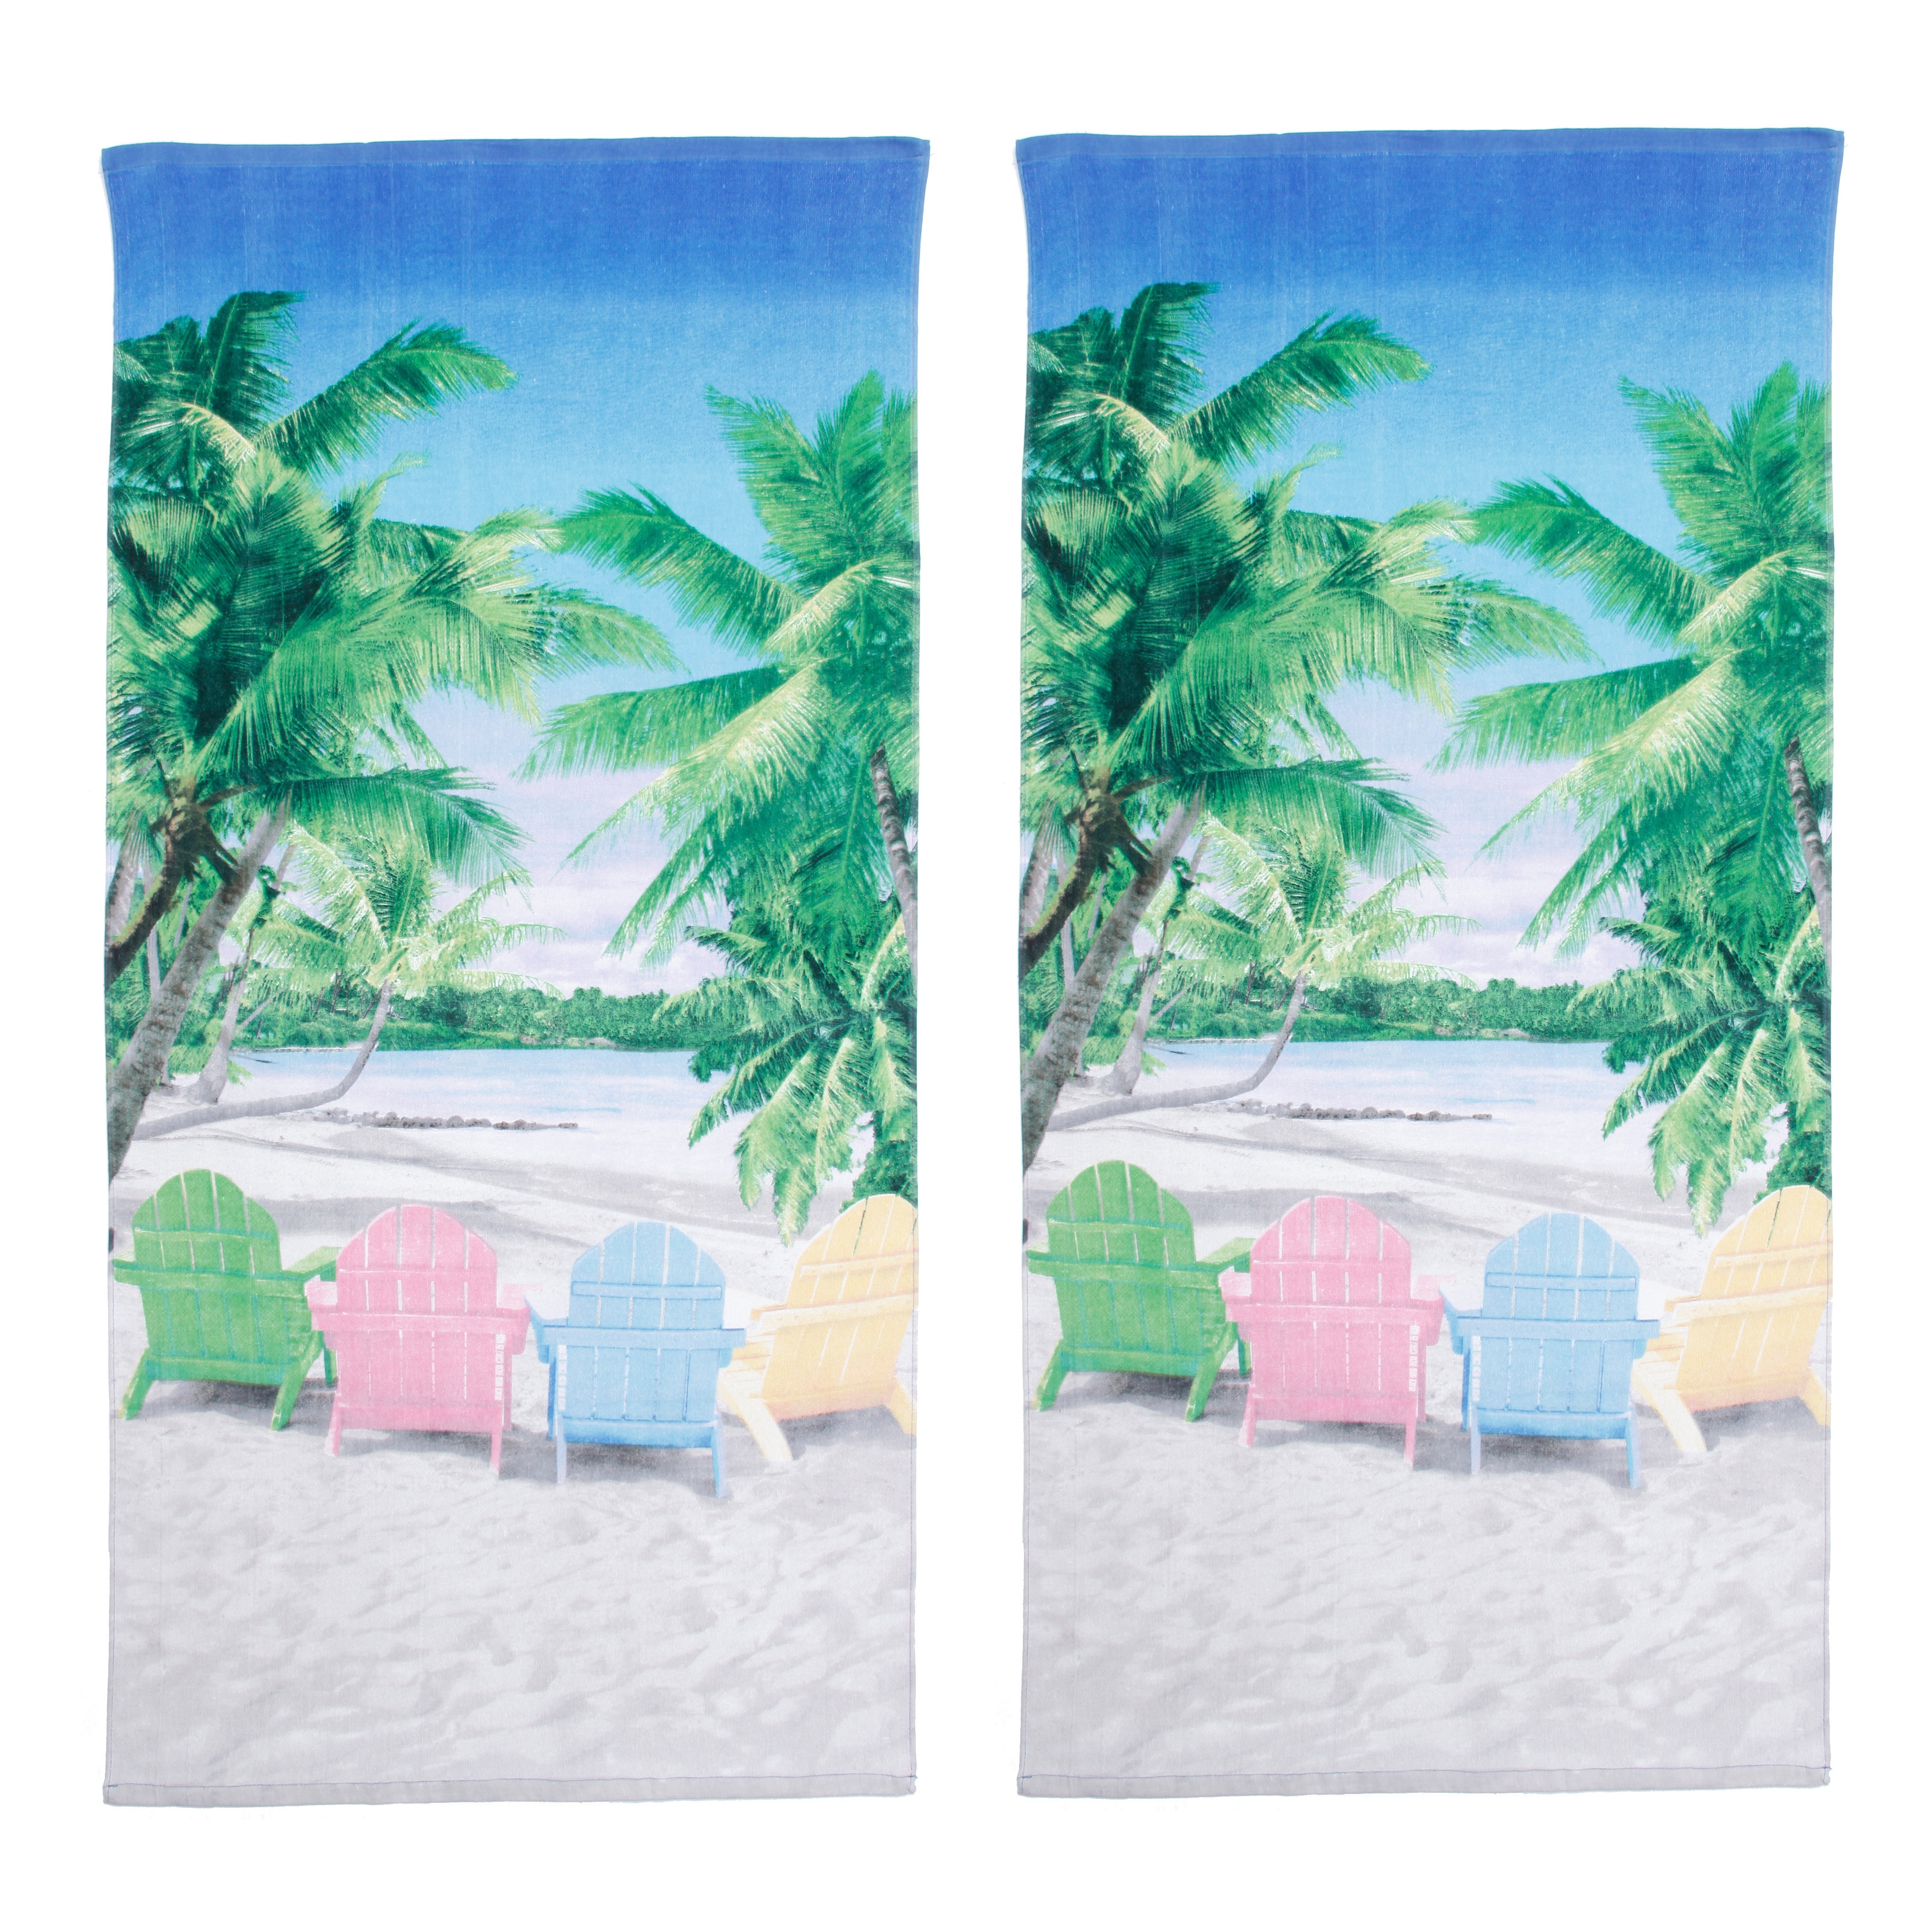 Tropical Beachfront Chairs Beach Towel Set Of 2 (MultiDimensions 60 inches long x 30 inches wide Includes Two (2) TowelsTropical beach setting designFiber reactive printed towelFine print from edge to edgeVelour for softnessMachine Wash Cold, Gentle Cycl